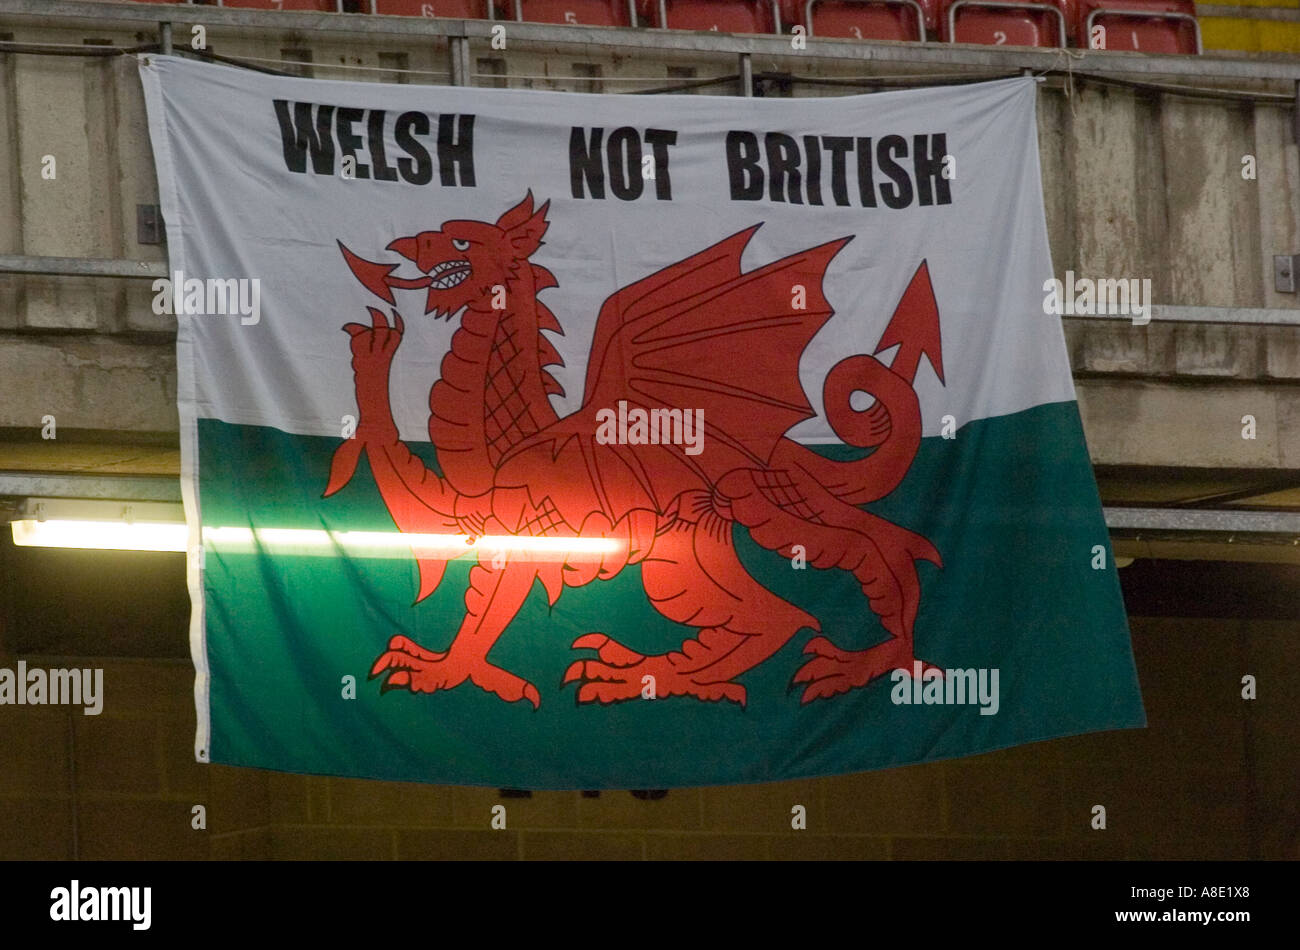 Welsh flag with Welsh not British written on it Stock Photo